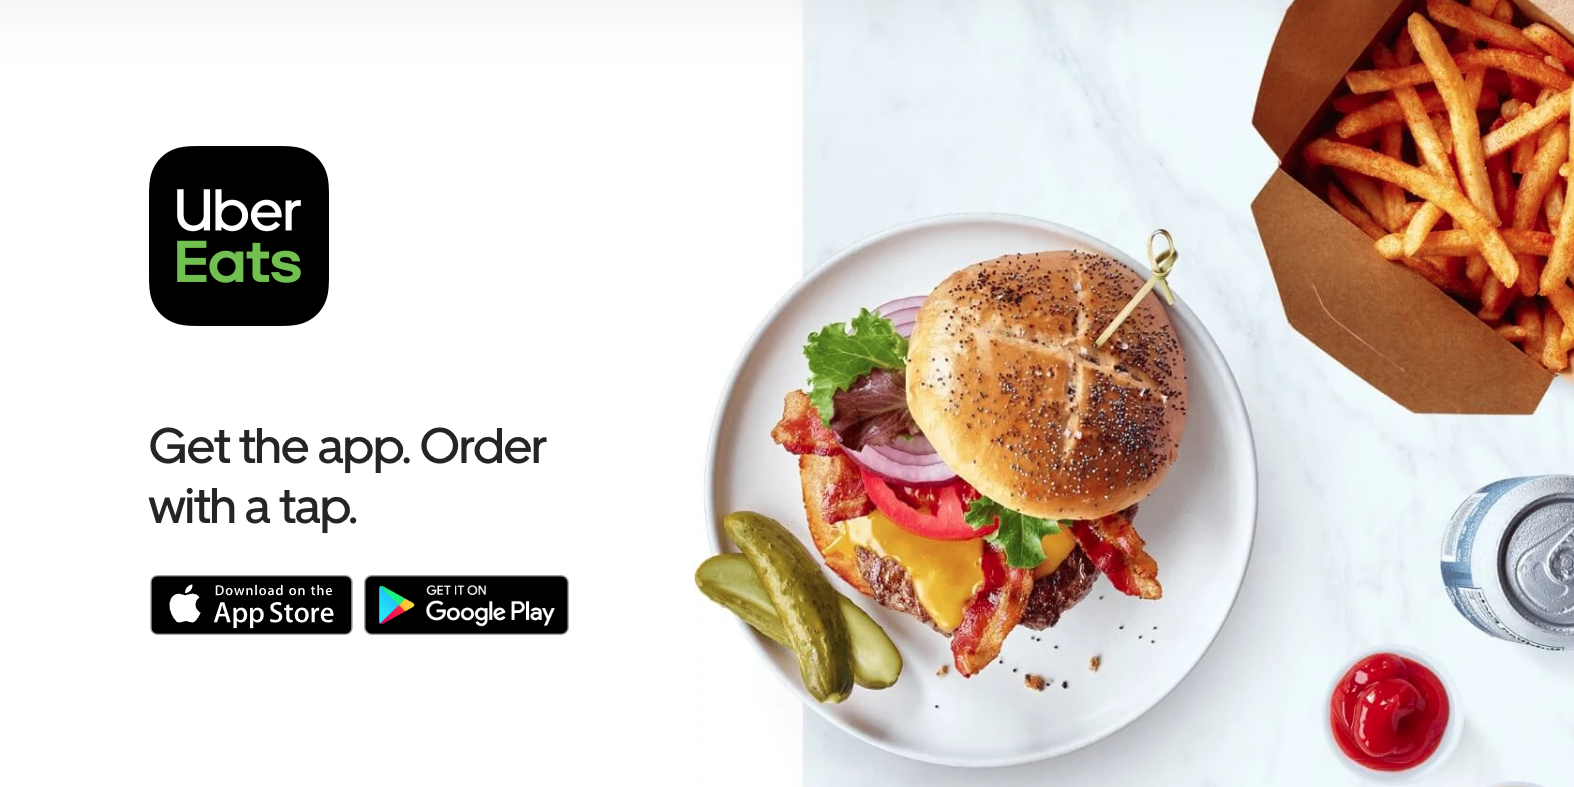 Get 13 off your next Uber Eats order with this promo code 9to5Toys